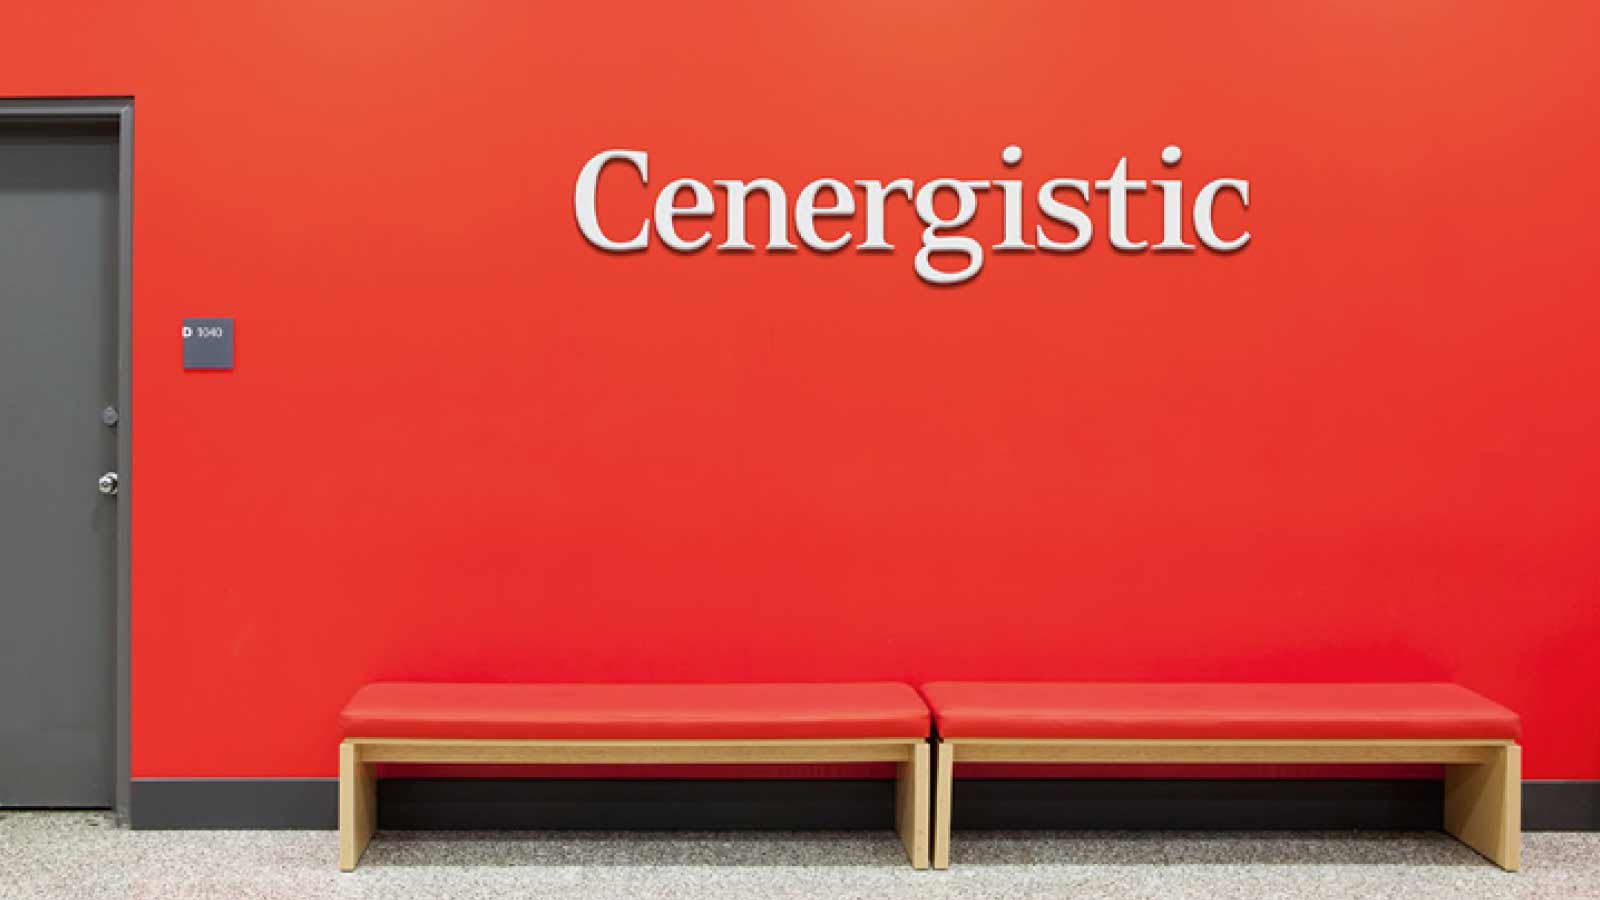 cenergistic office branding on red wall